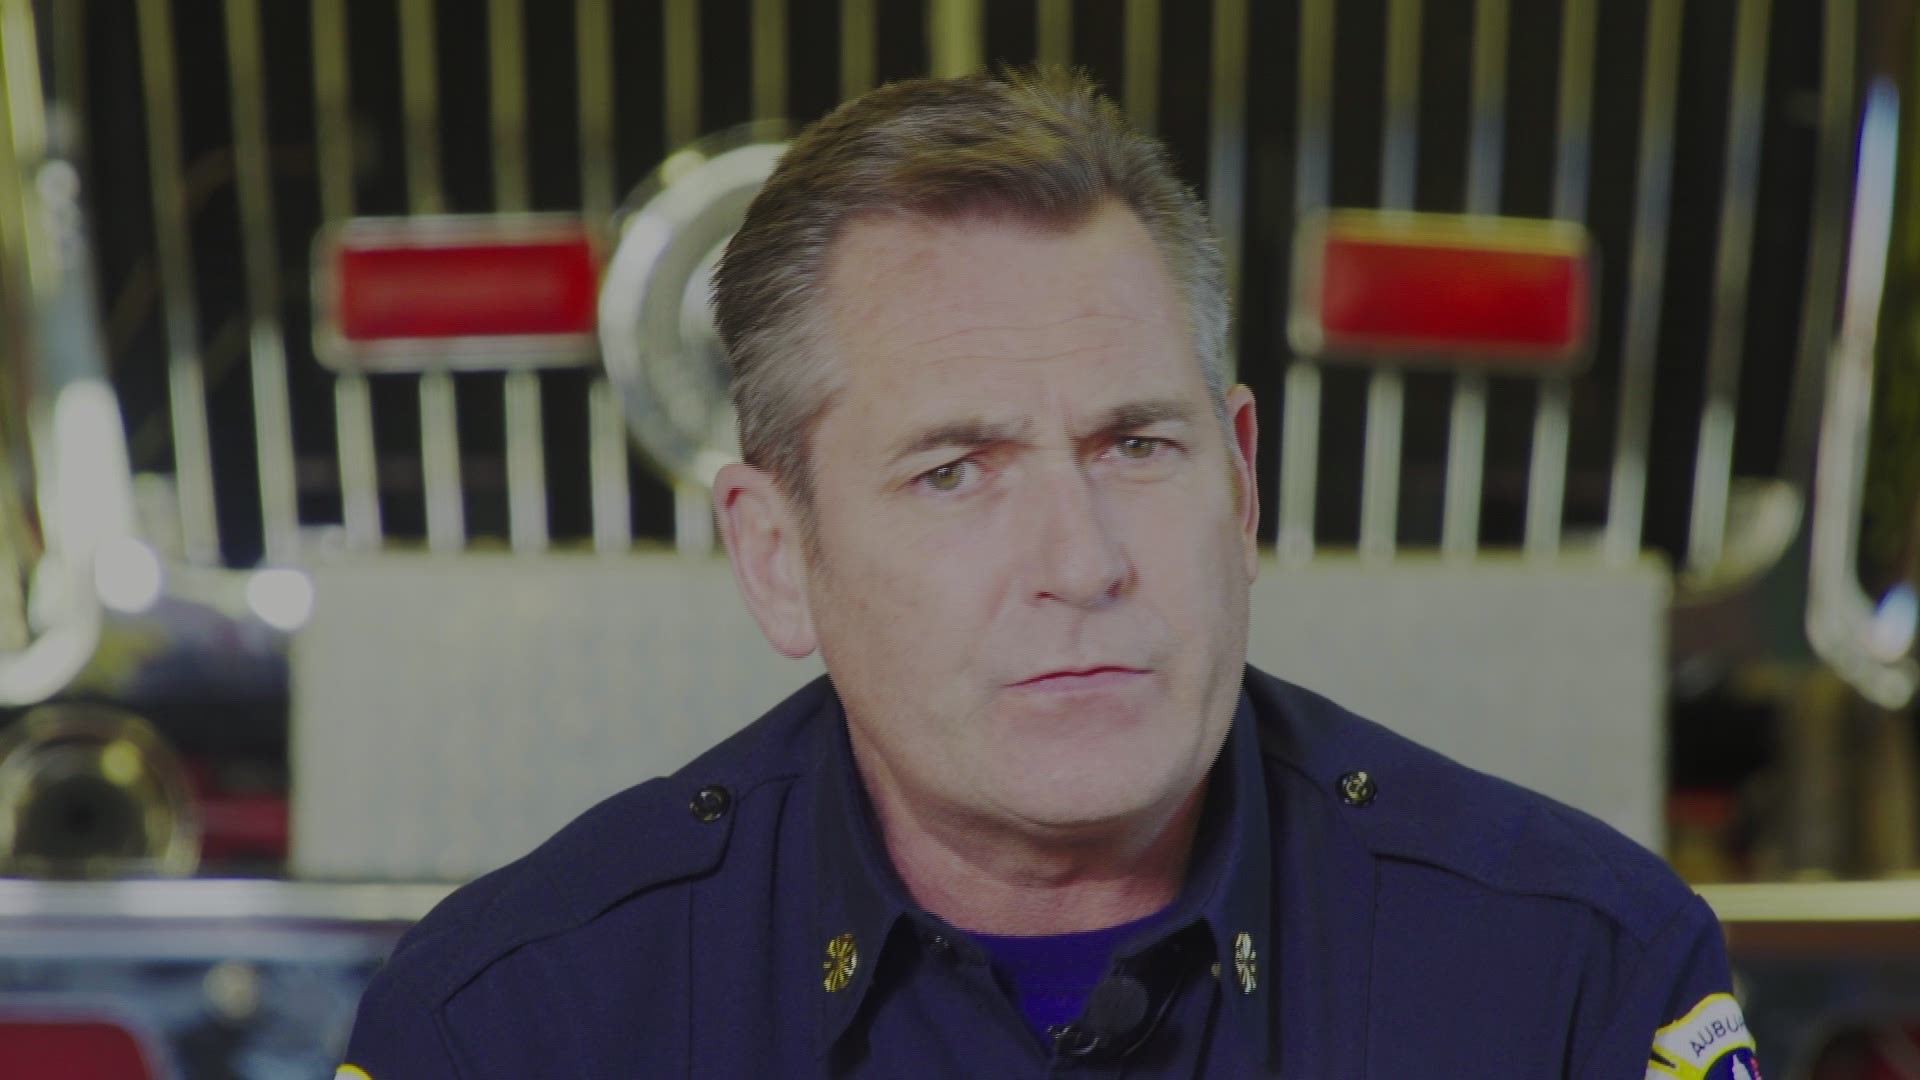 Auburn Fire Chief Dave Spencer shares how his department is leading the way